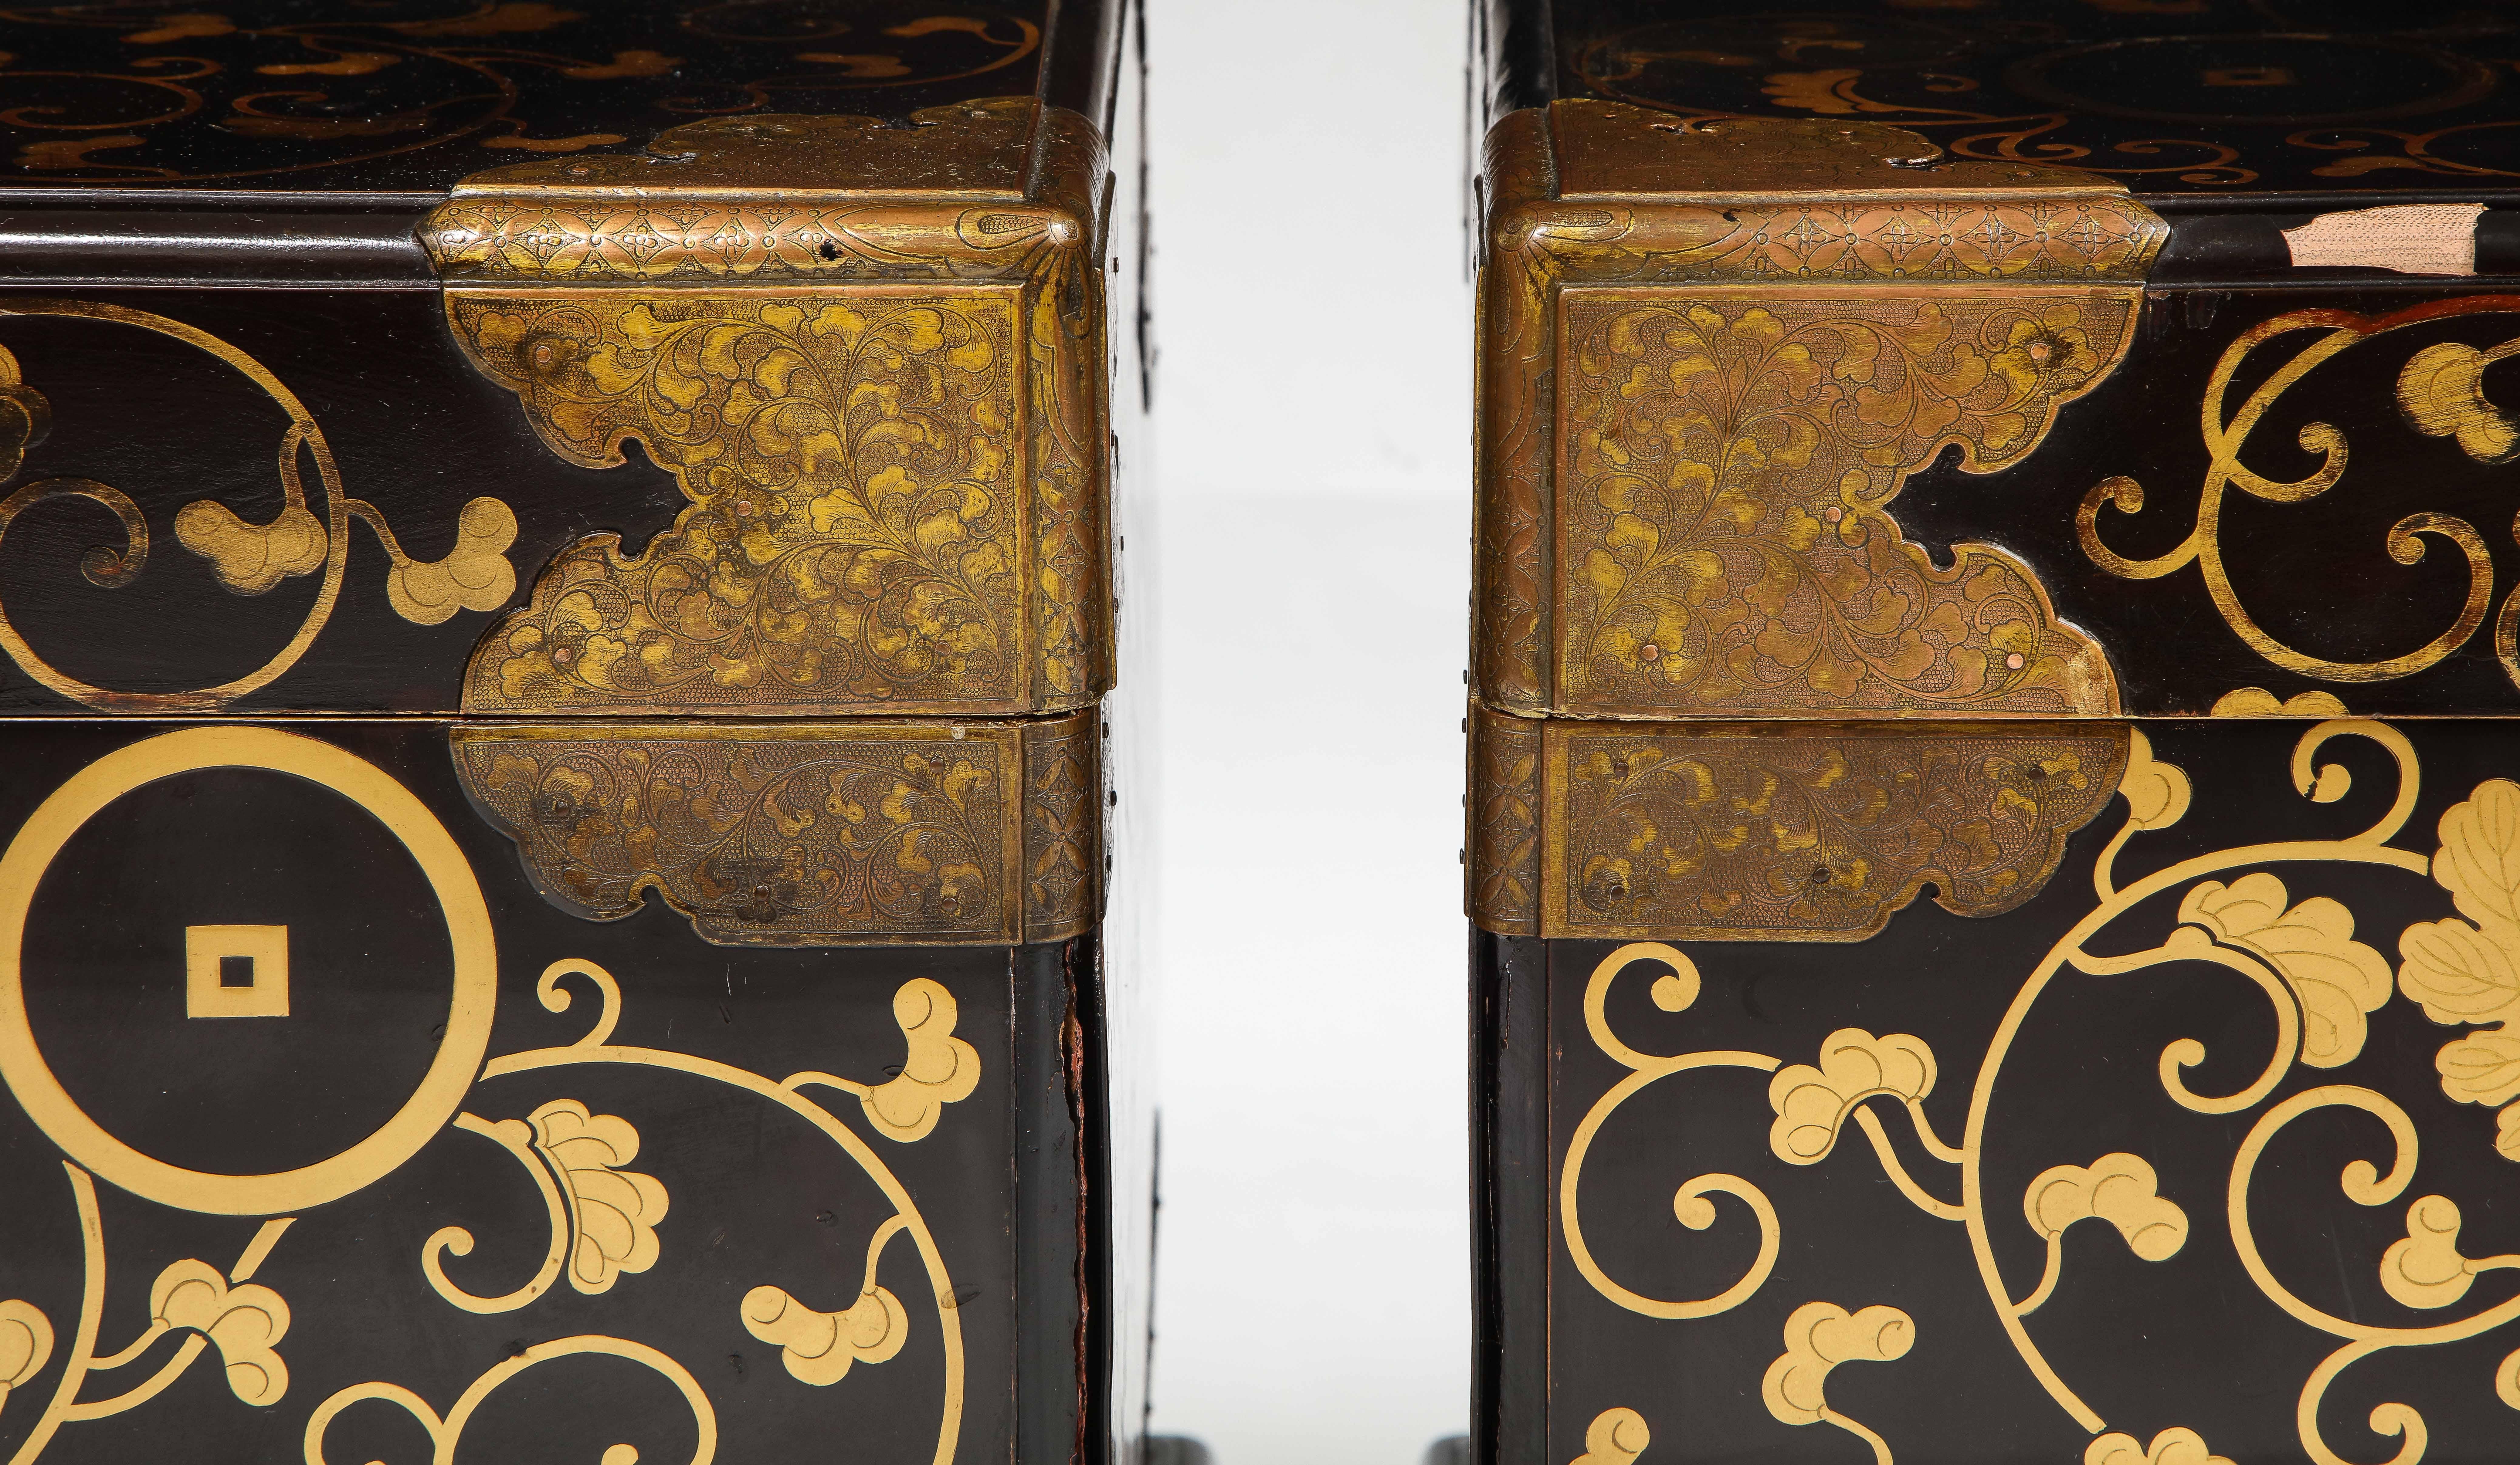  Pair of 19th Century Japanese Meiji Period Dore Bronze Mounted Lacquered Chests For Sale 5